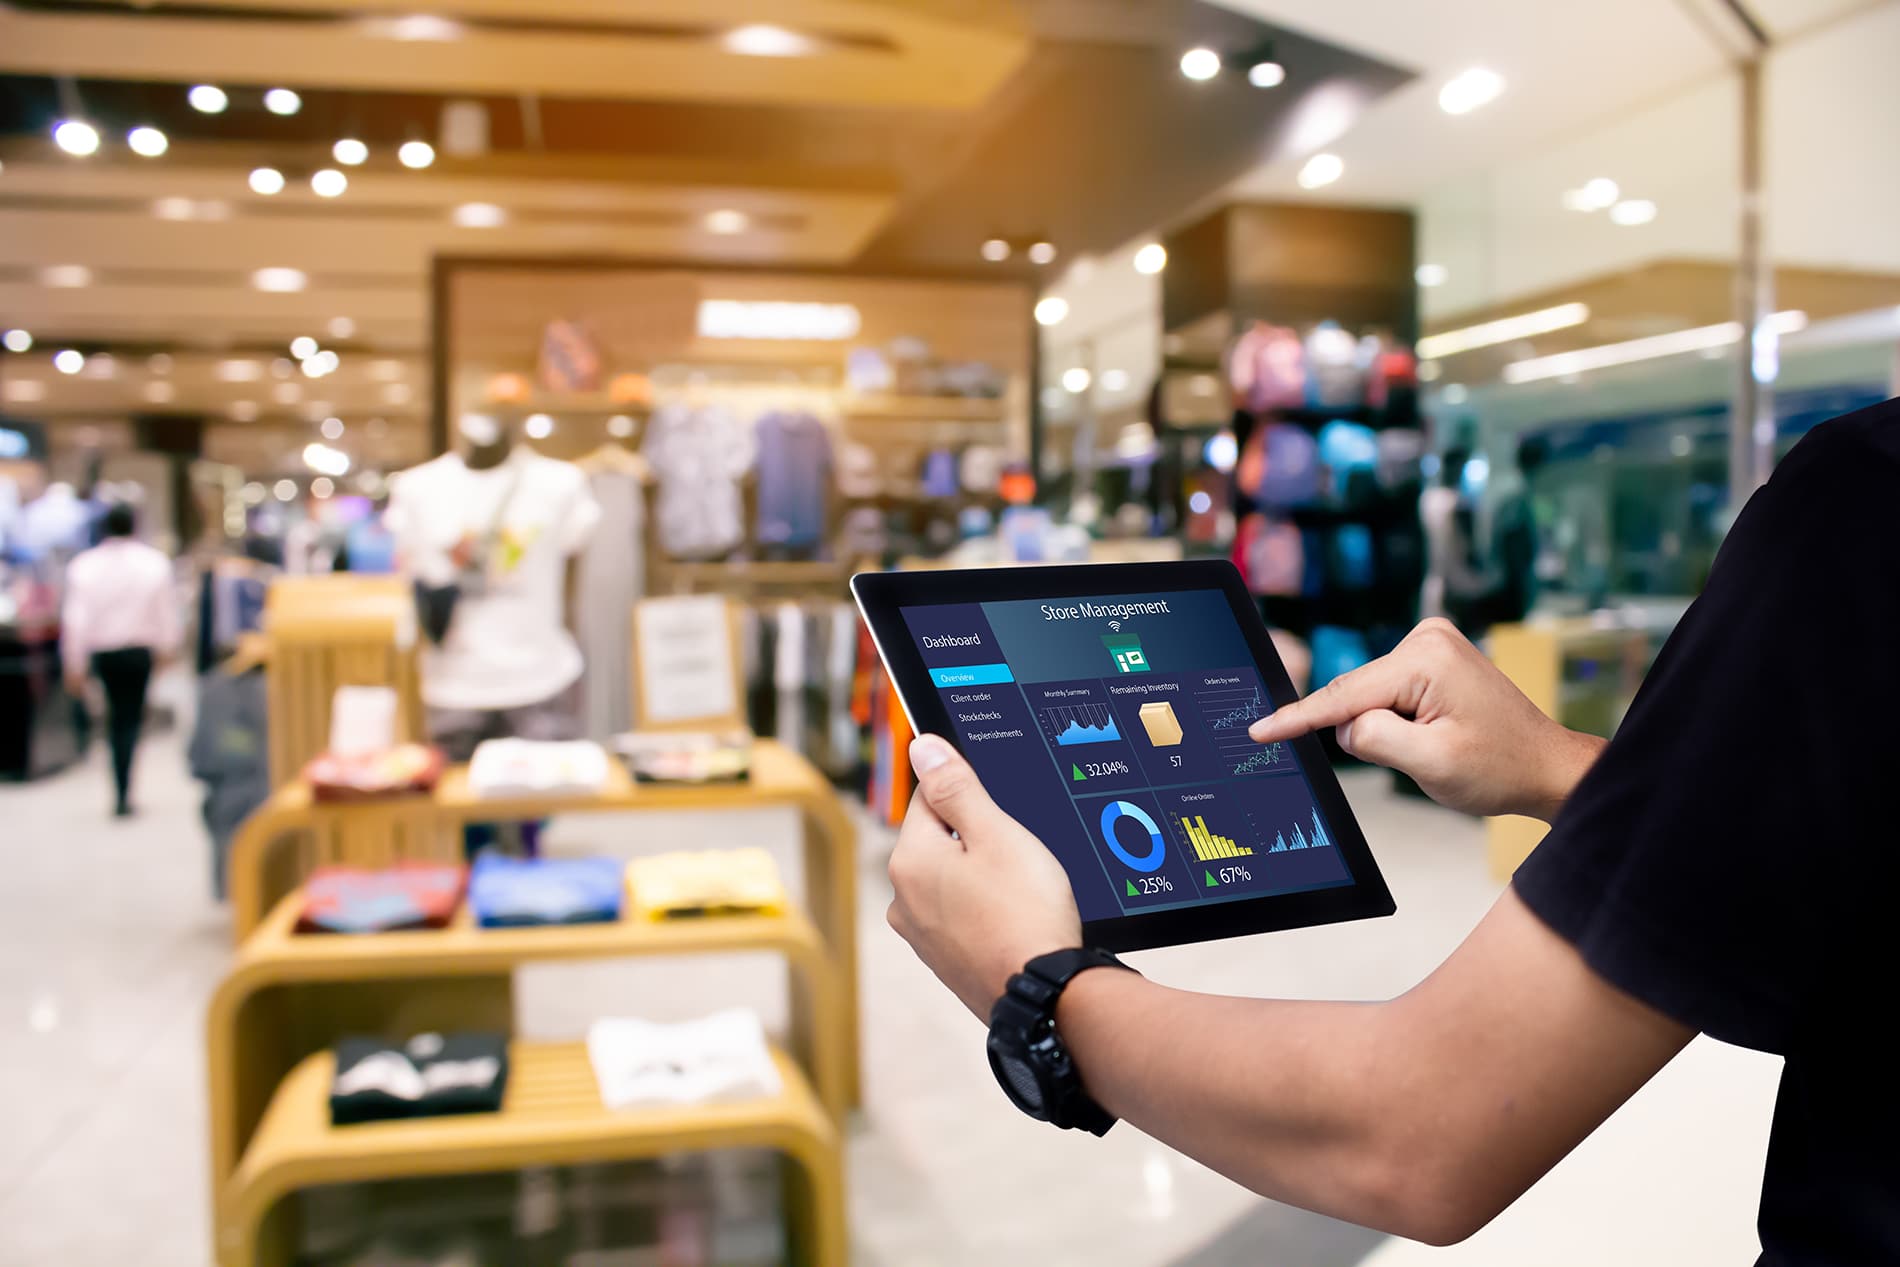 ITSM Modernization in retail is coming from no-code platforms